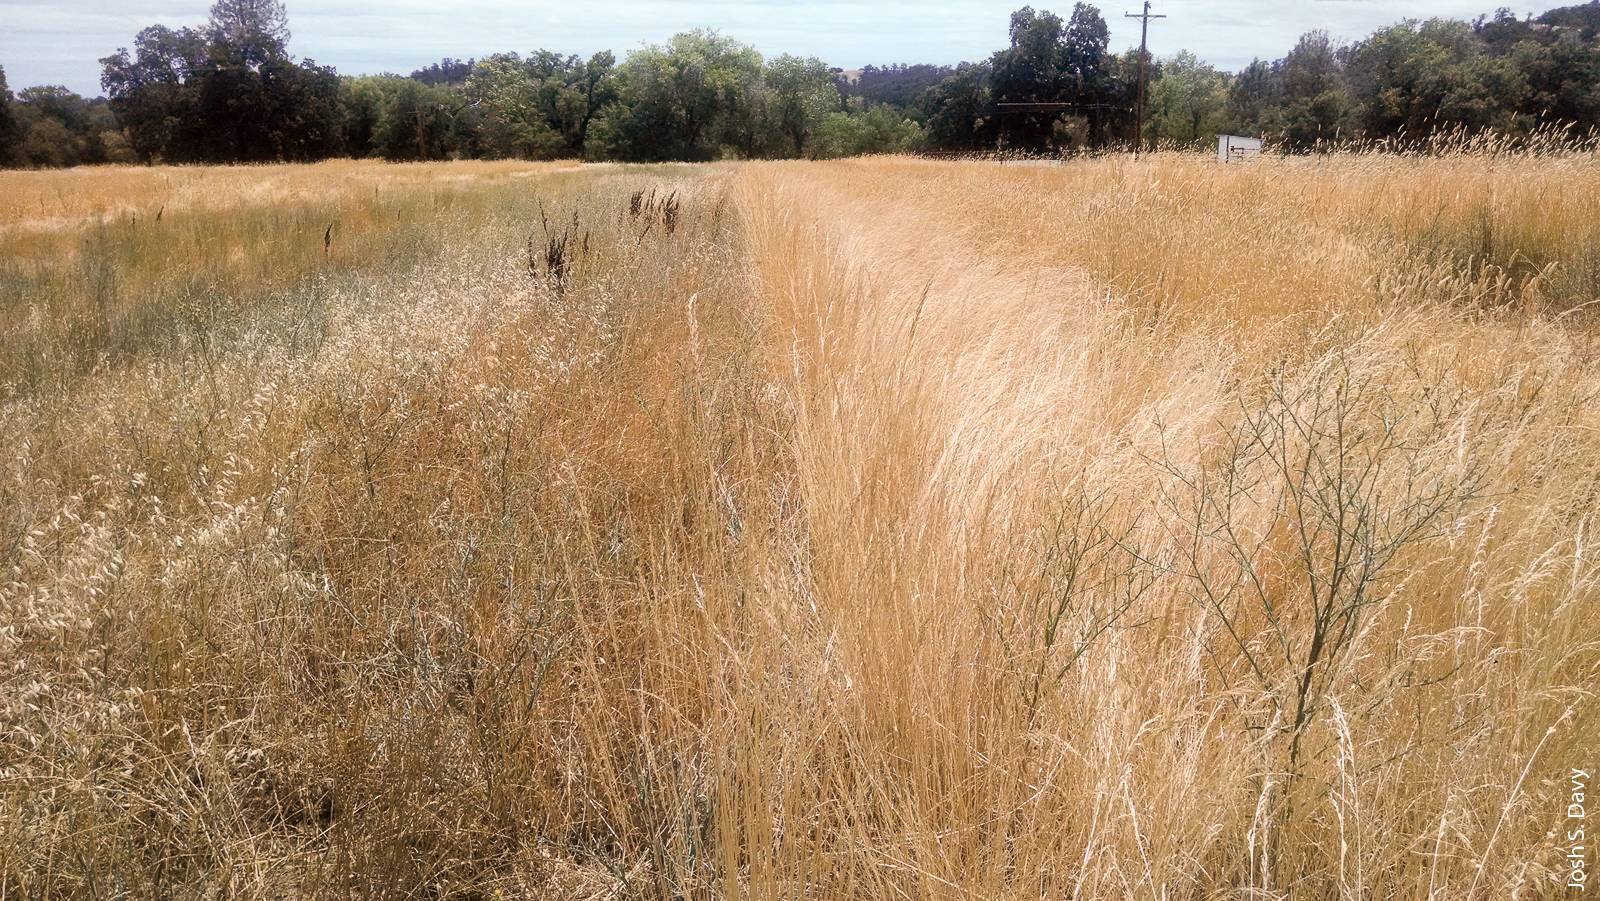 Results from a 5-year rangelands study suggest that perennial grasses, including Flecha tall fescue and several varieties of hardinggrass, established well and suppressed yellow starthistle, an invasive weed. Here, yellow starthistle completely invaded the control plot (left), but not the Flecha tall fescue plot (right).